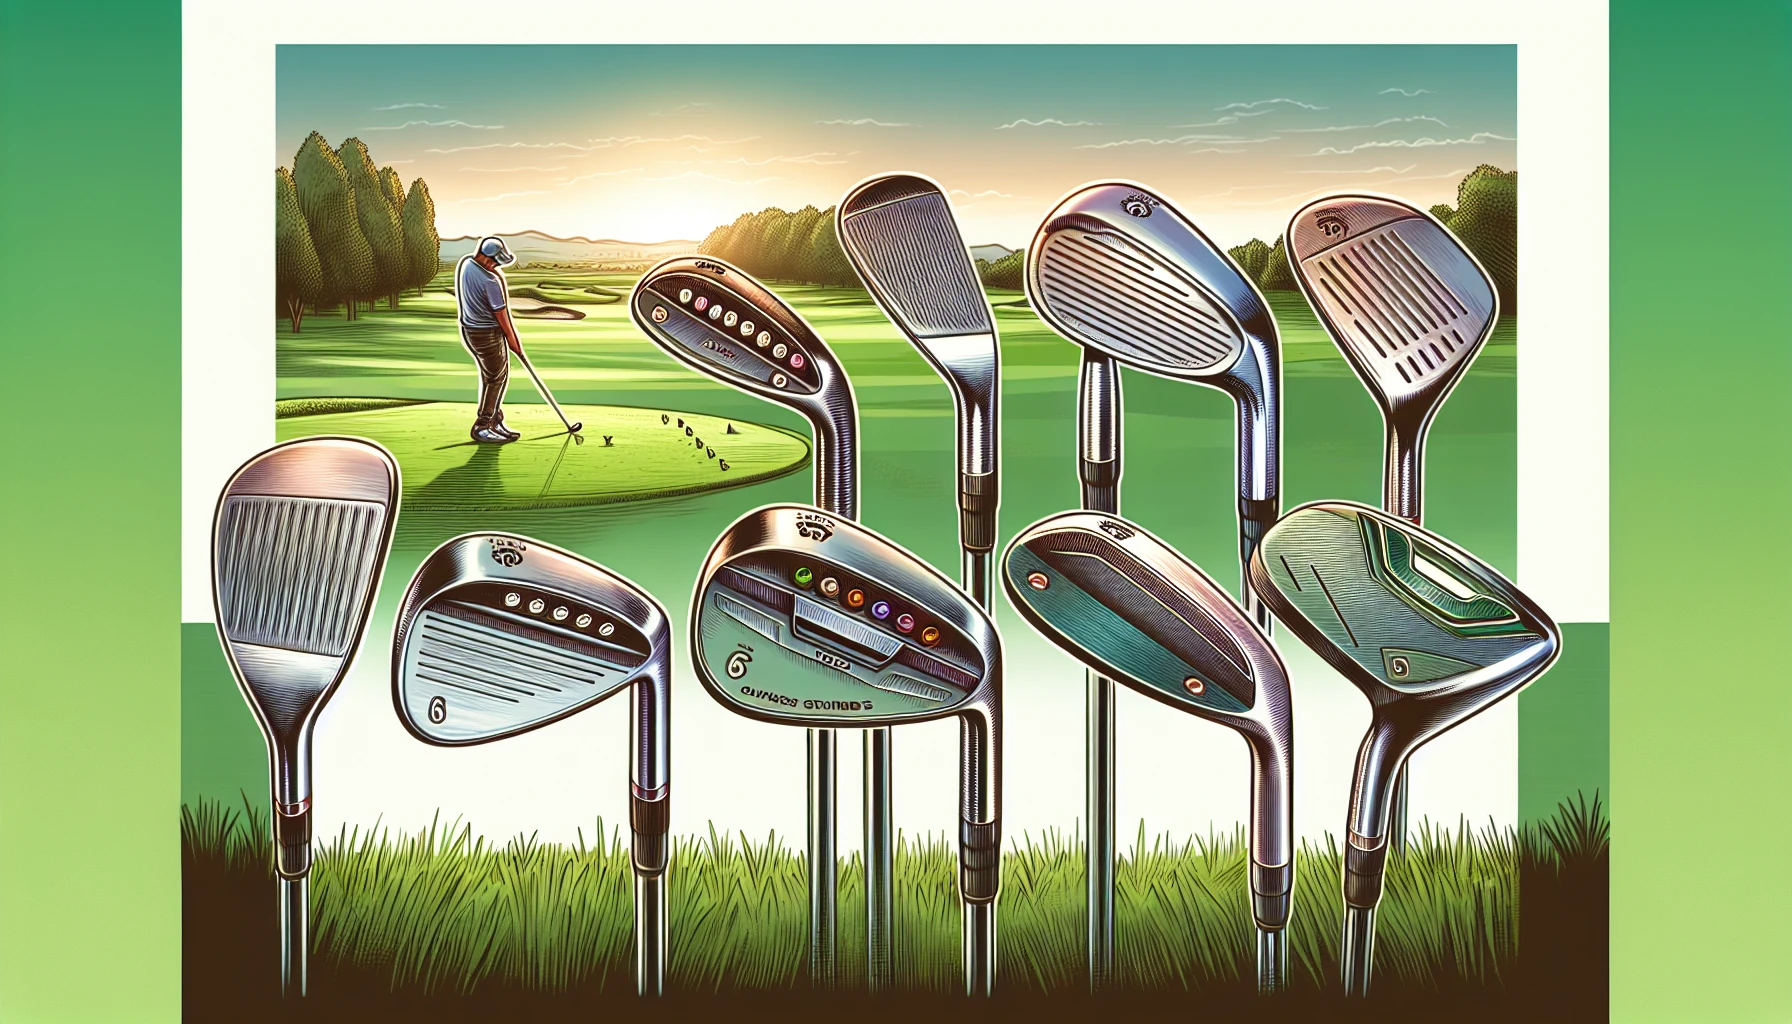 Illustration of different wedge bounce and grind options